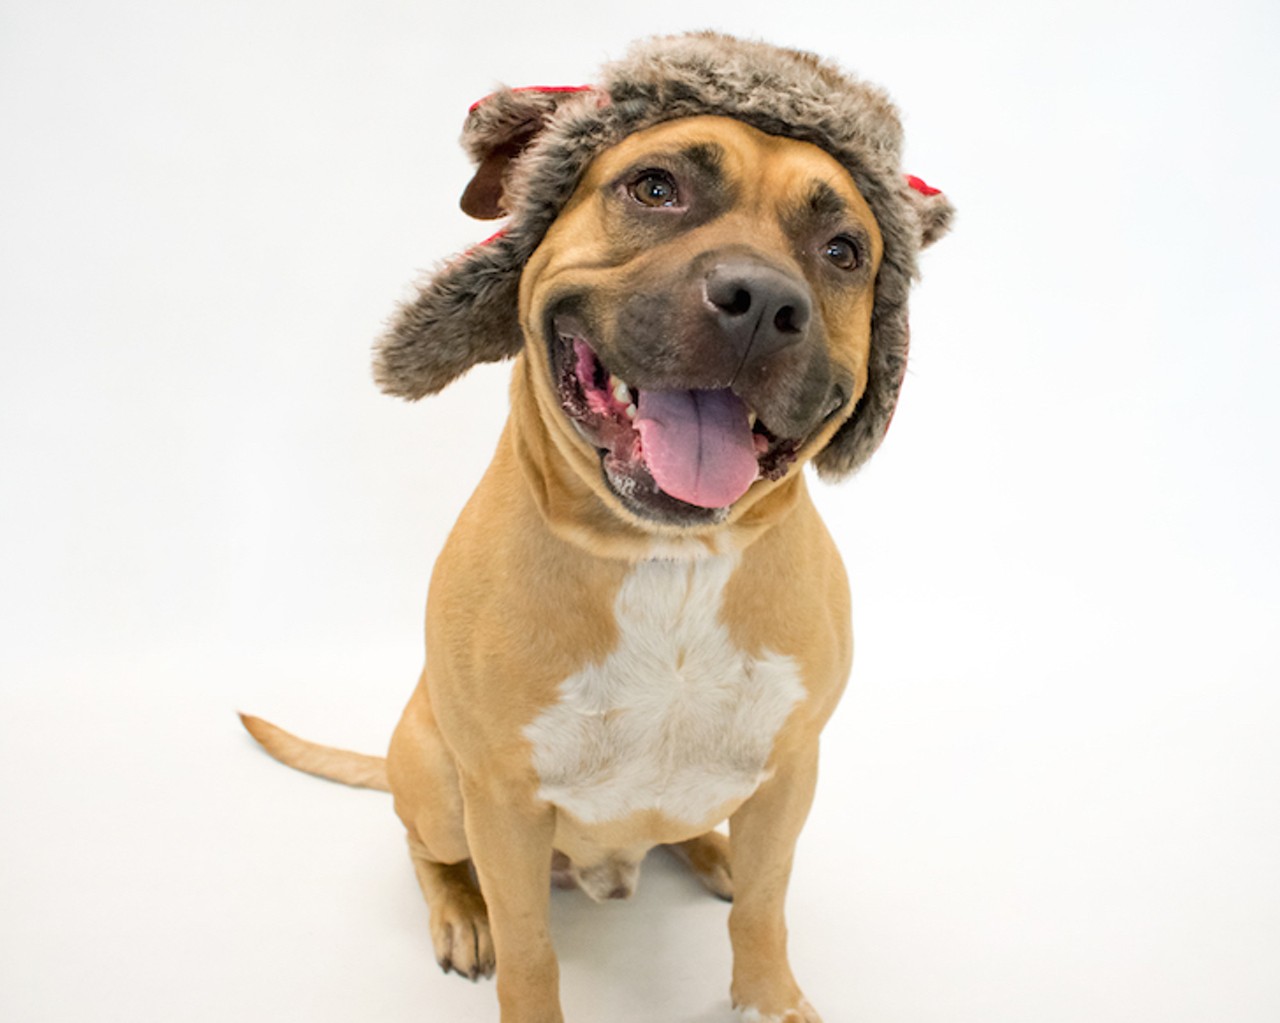 17 adoptable dogs that would love to fill your heart with Christmas cheer